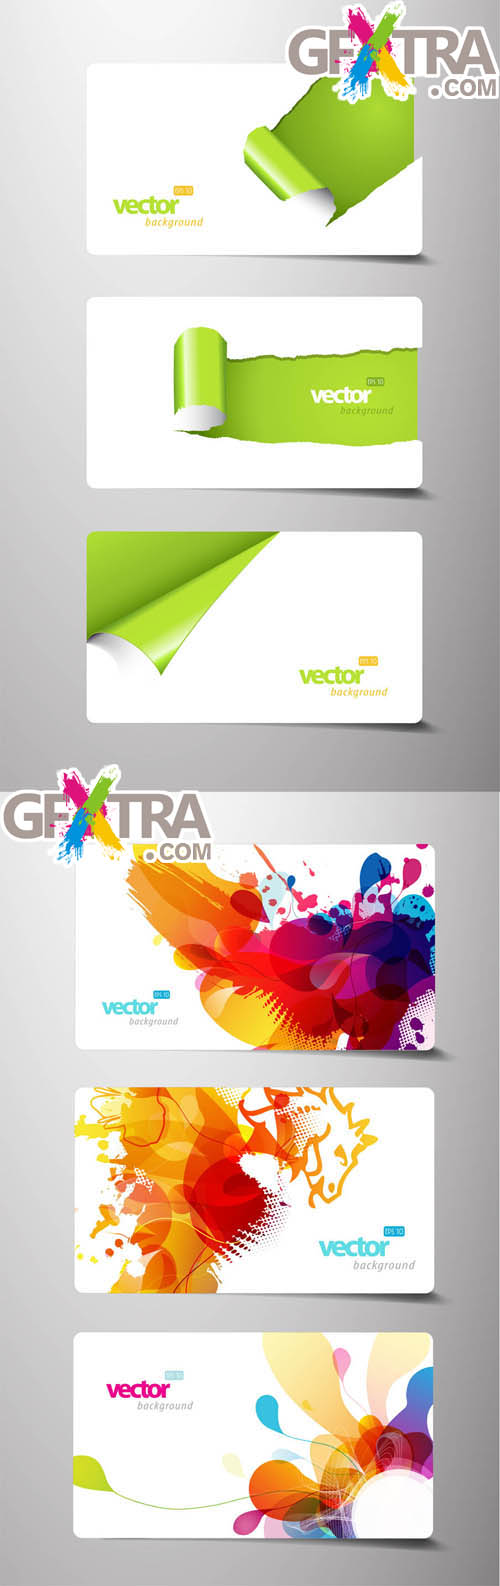 Vector Elements Creative Cards